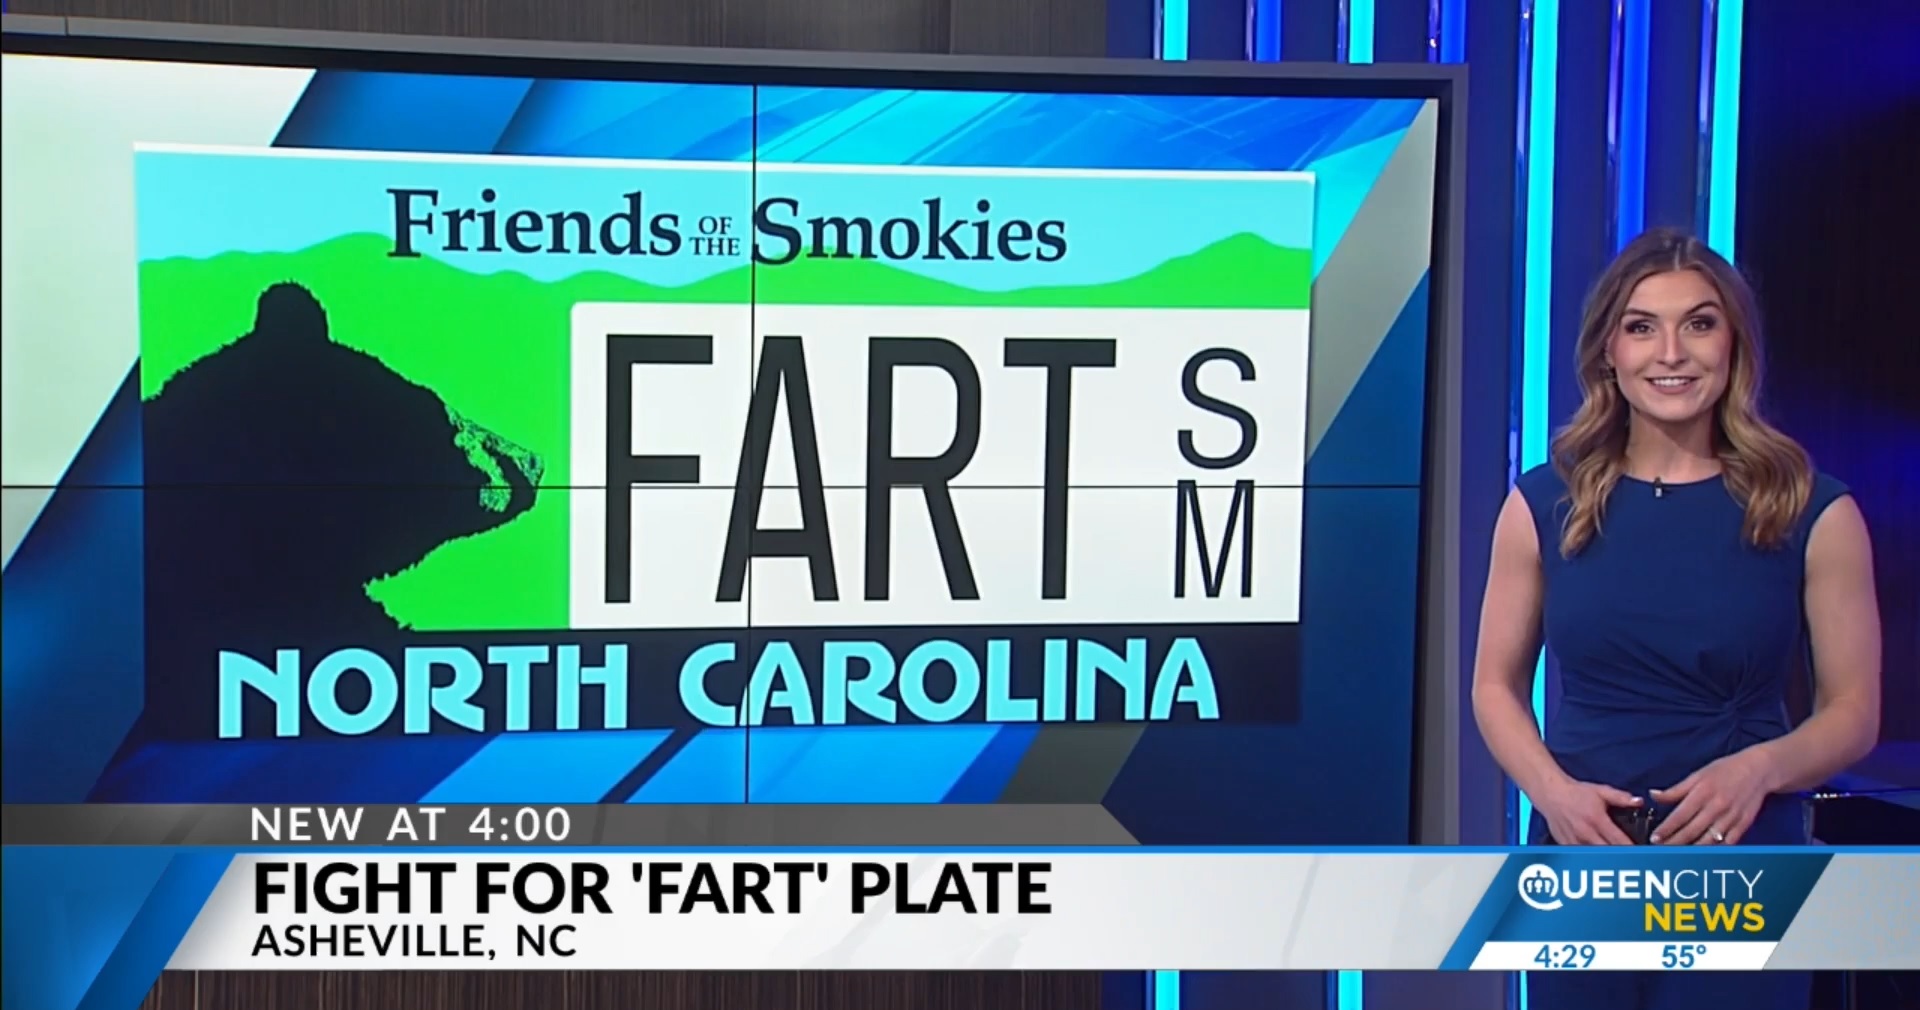 "Fight for 'FART' Plate"